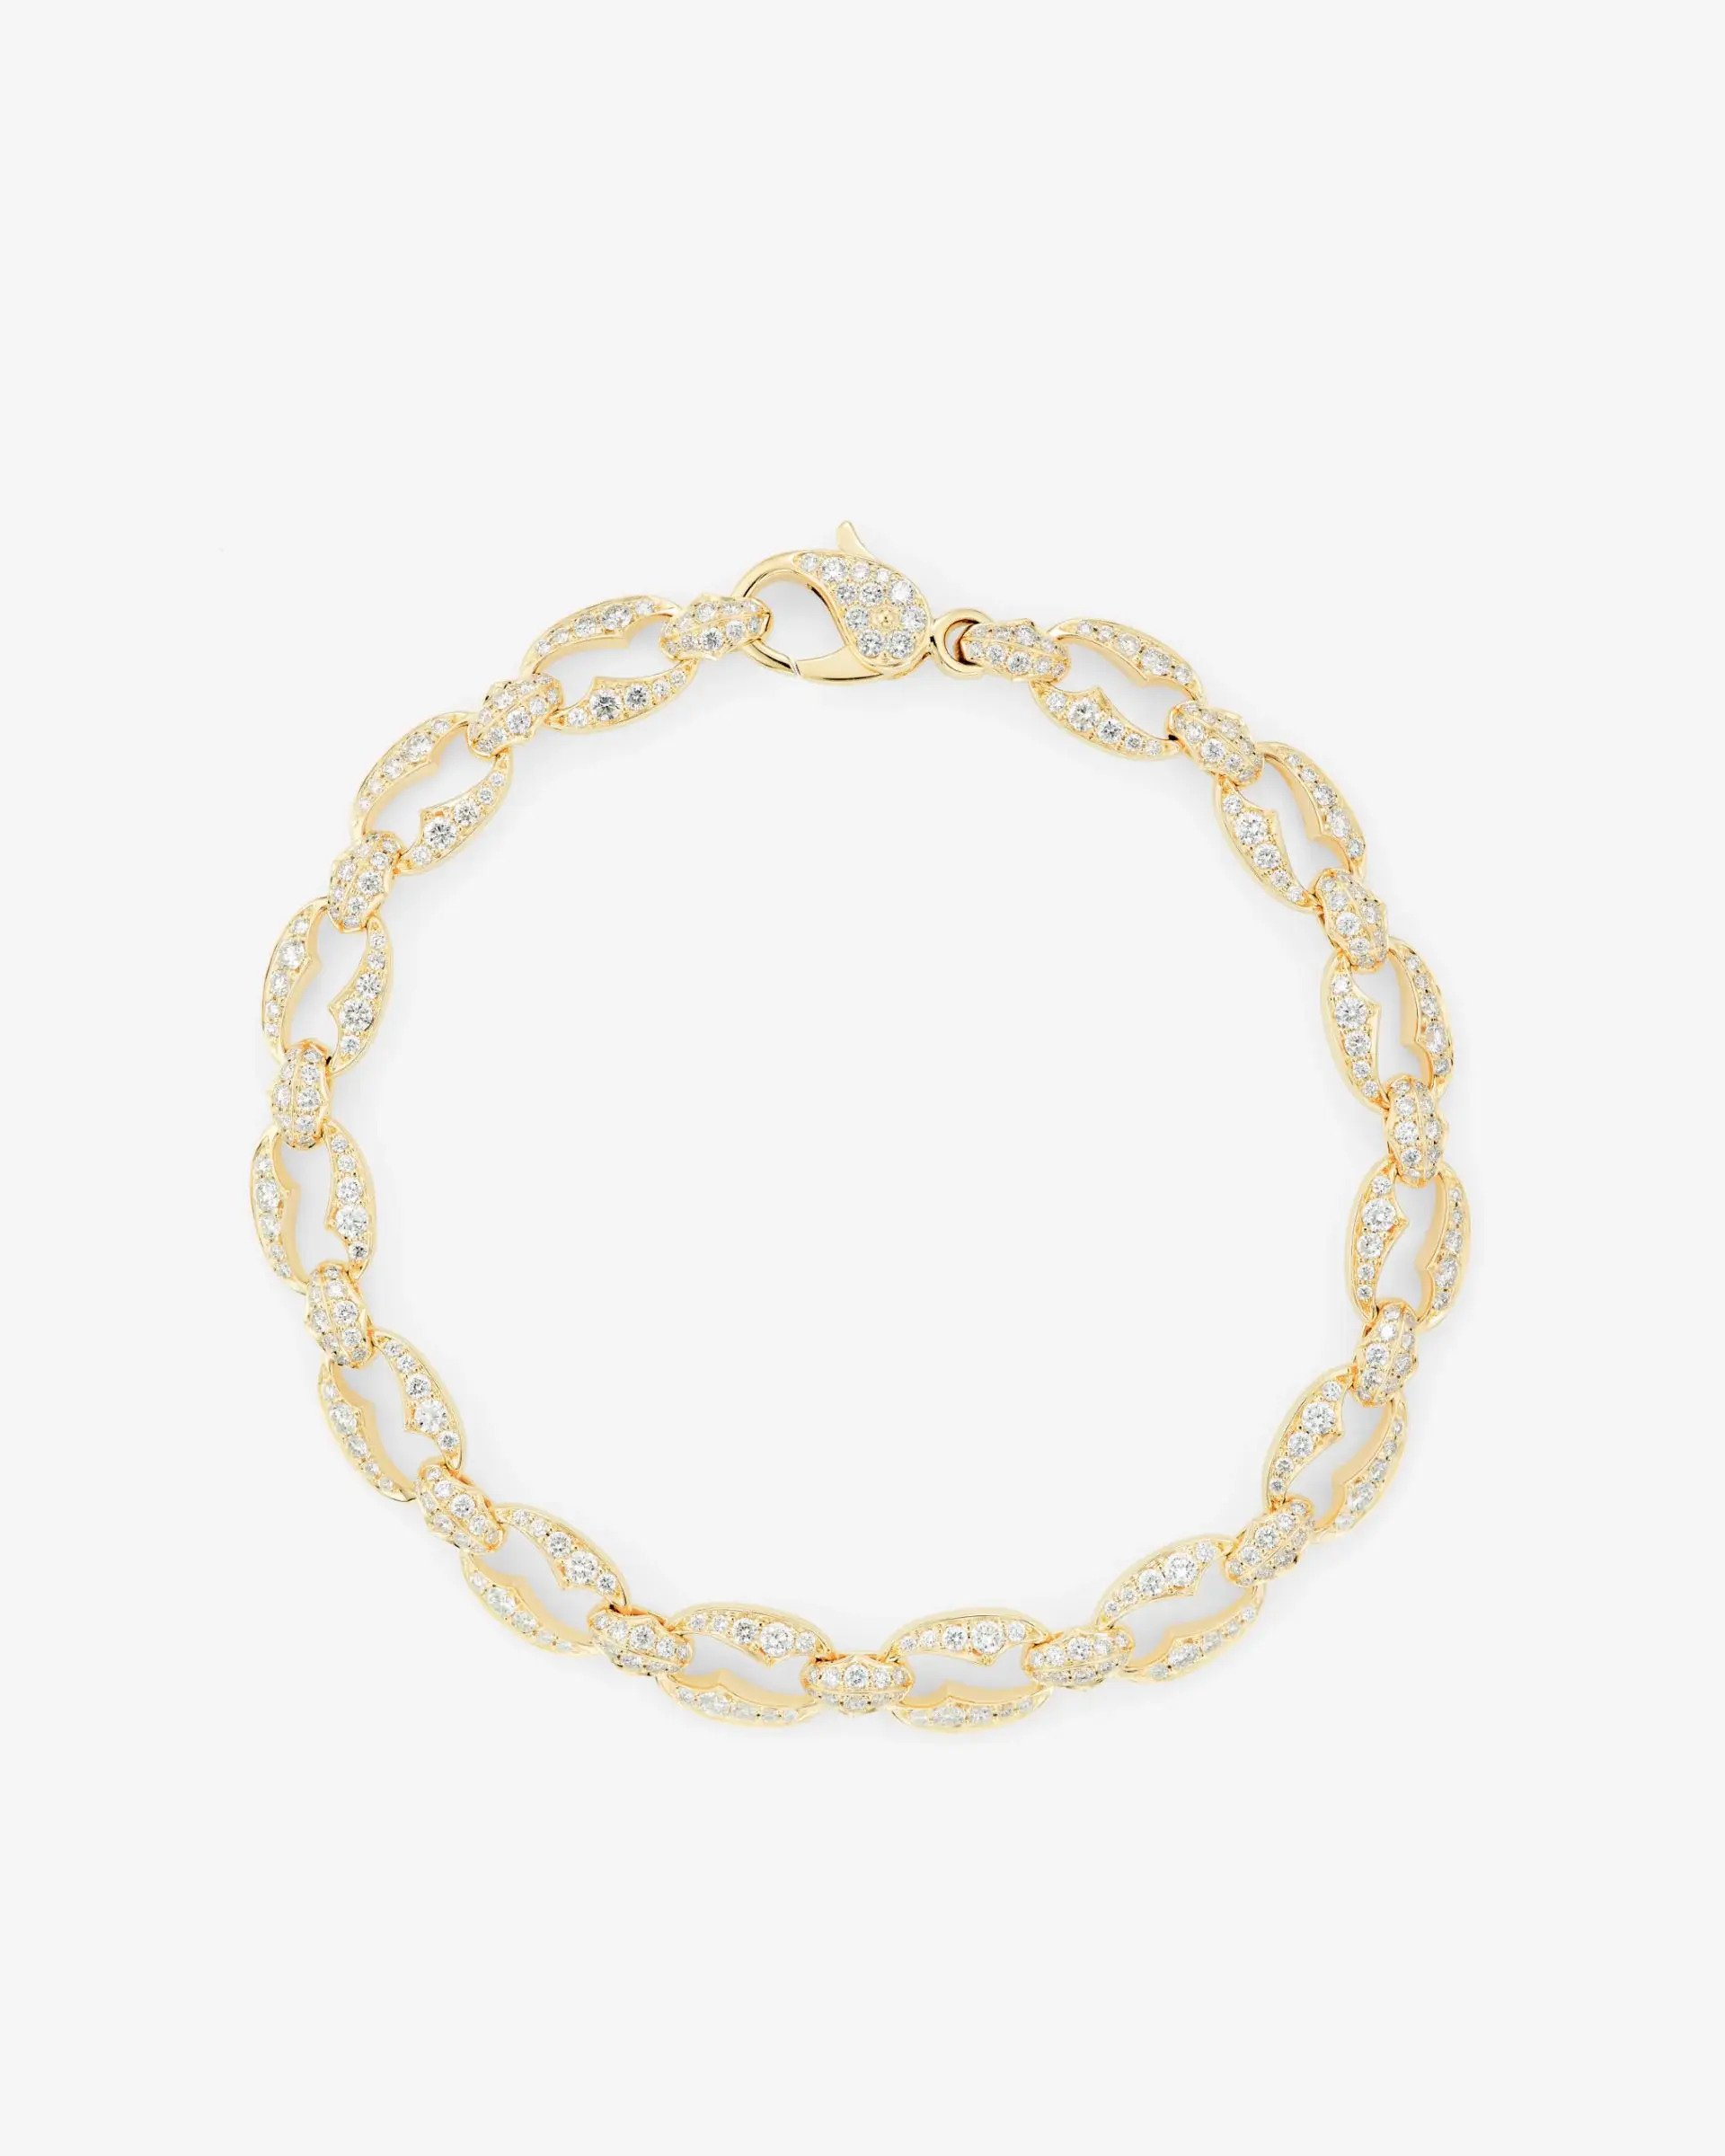 Thorn Embrace Chain Link Bracelet with White Diamonds in 18kt Yellow Gold